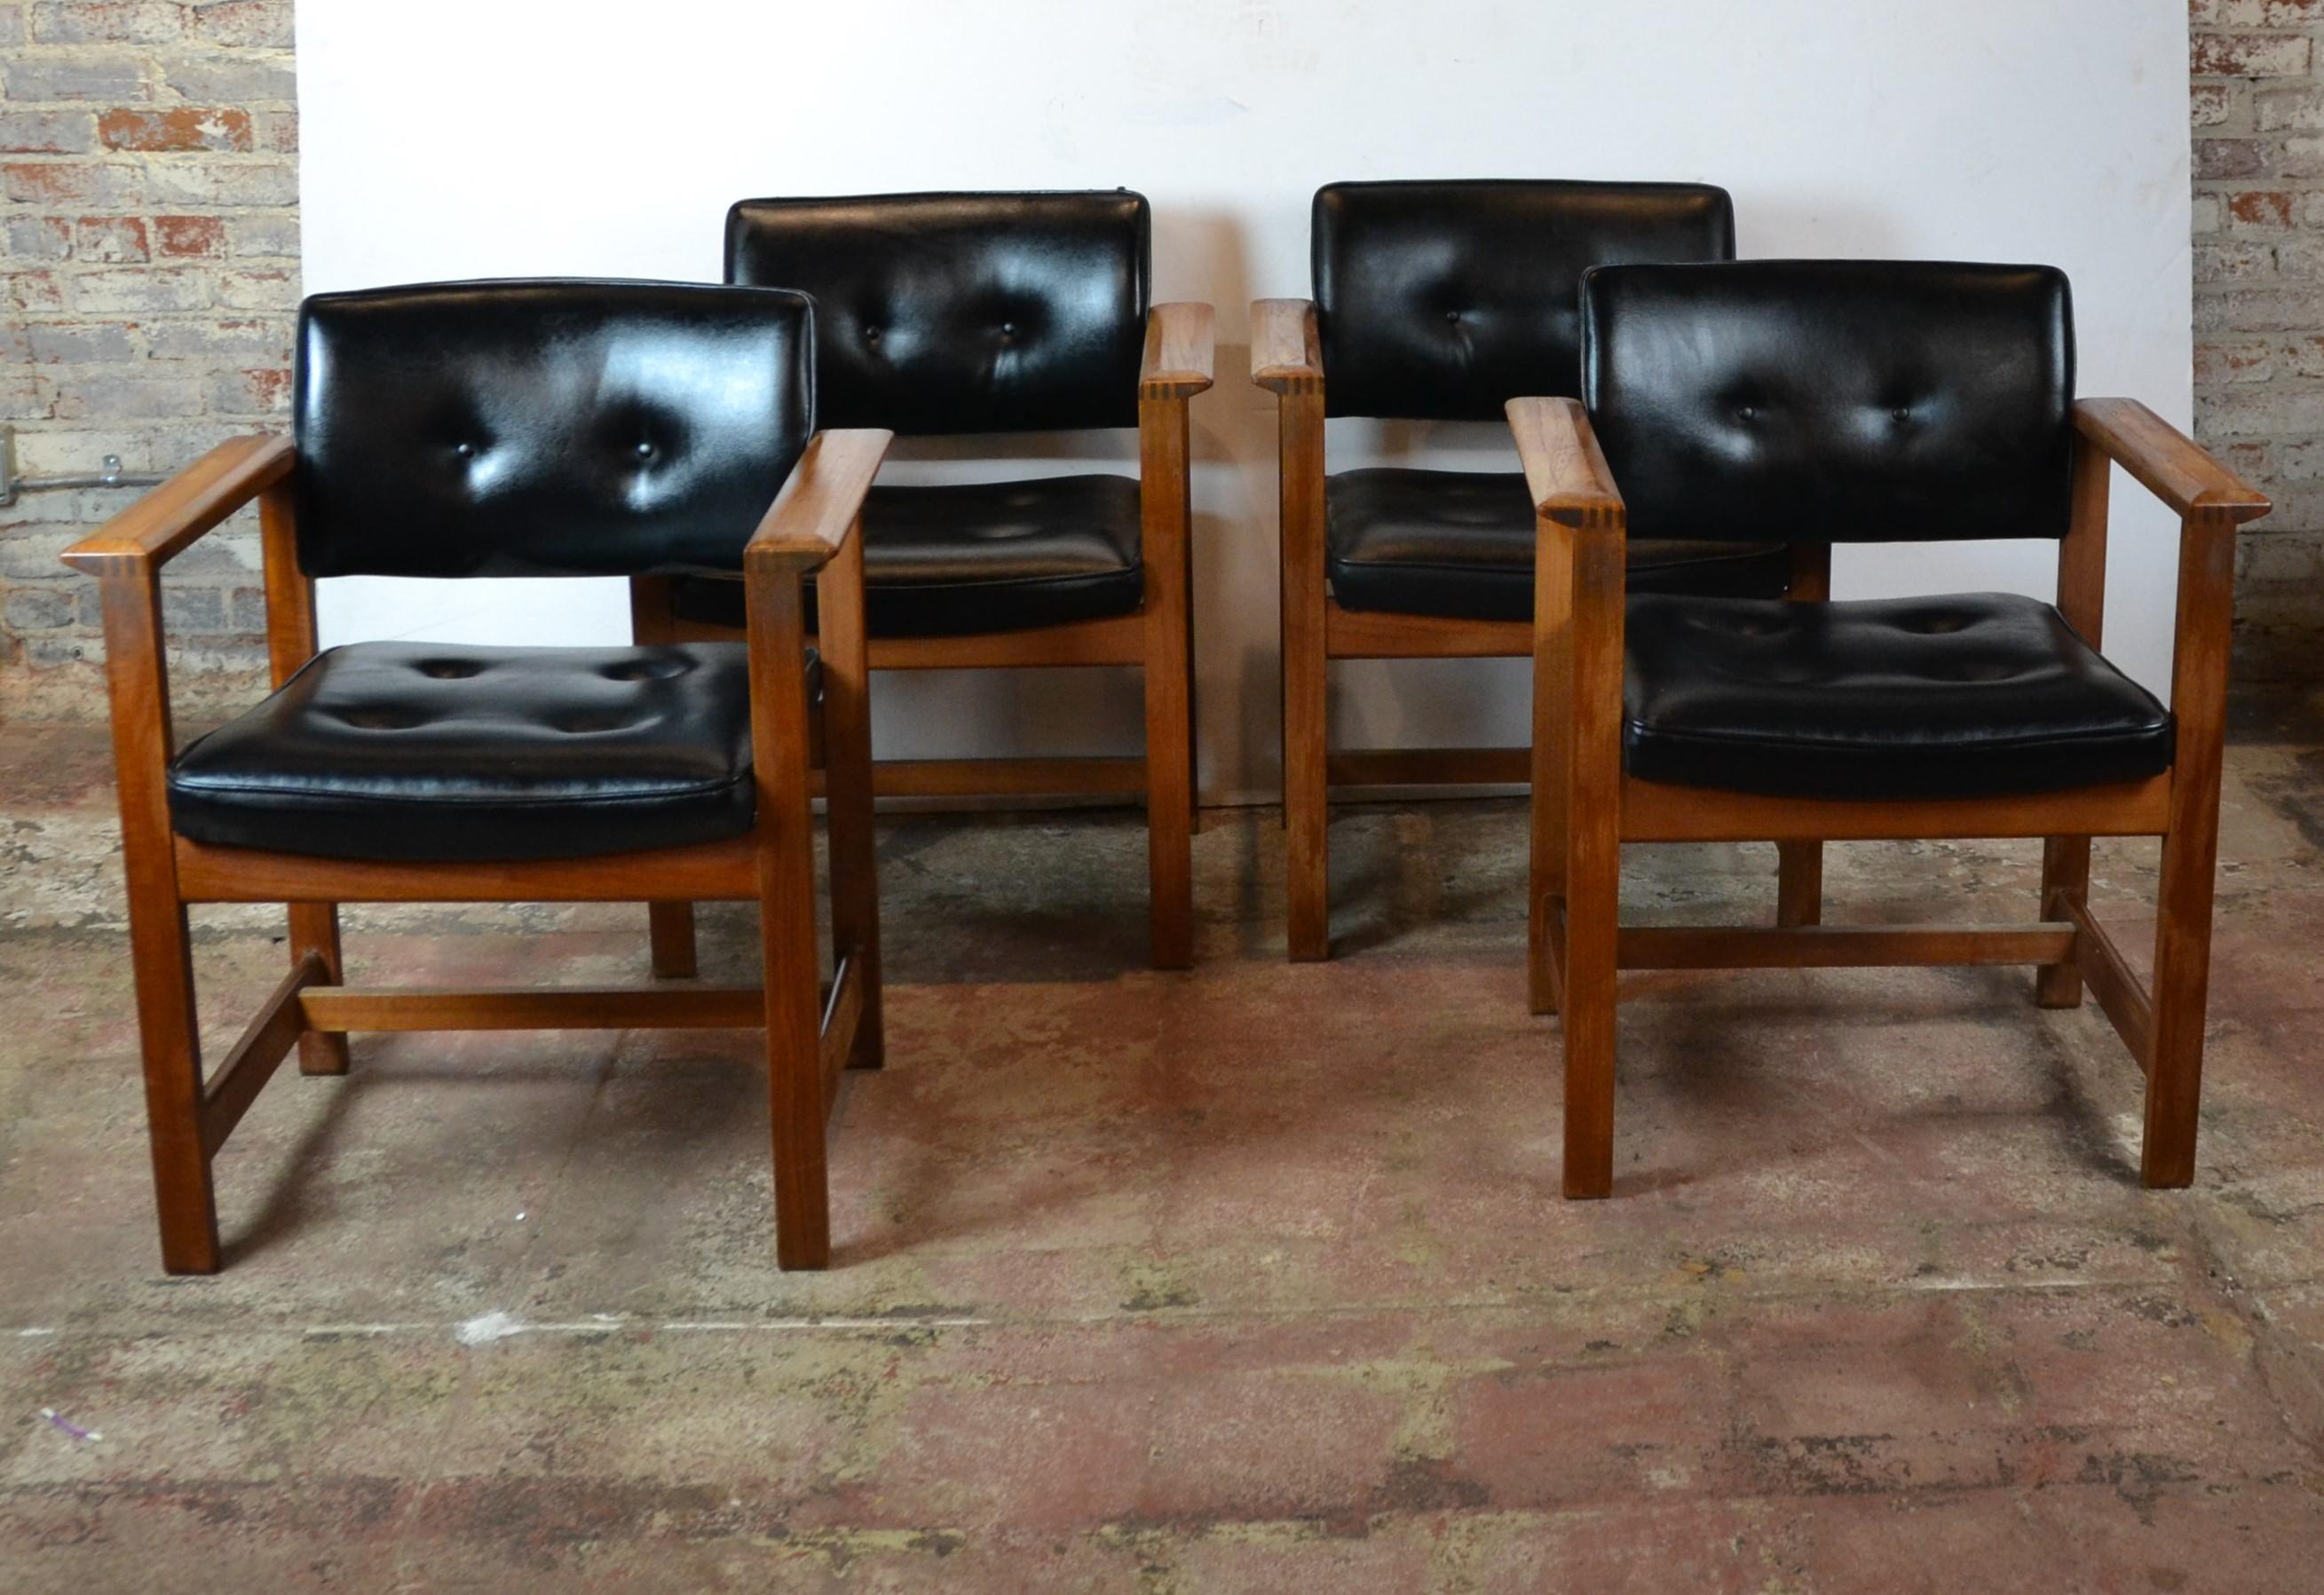 Set of four midcentury armchairs. The arms have detail workmanship with teak wood. The chairs are covered in black faux-leather.